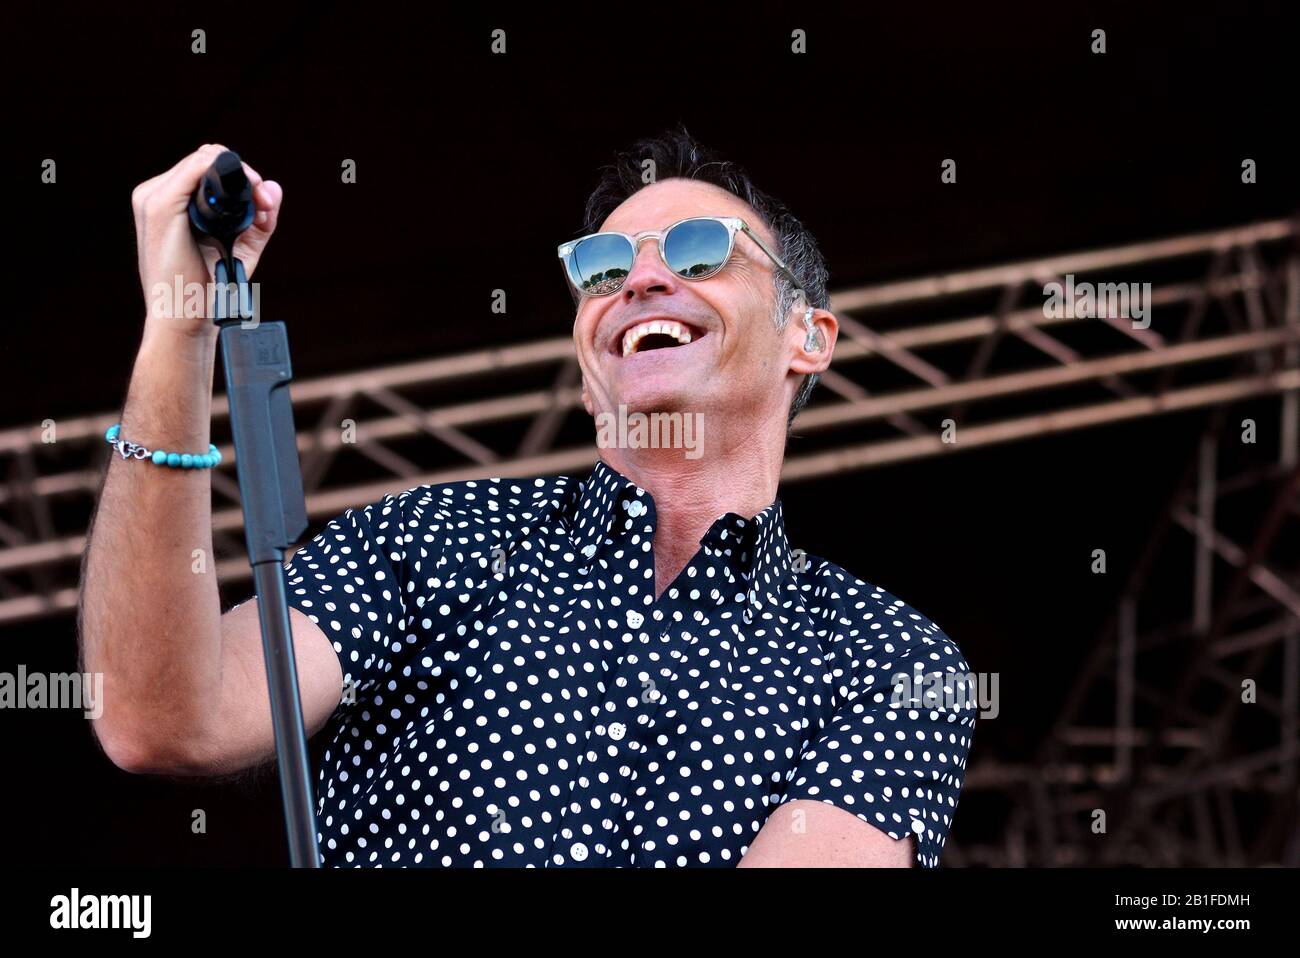 Marti Pellow preforming live on stage, 2019 Bents Park, South Tyneside Music Festival Stock Photo